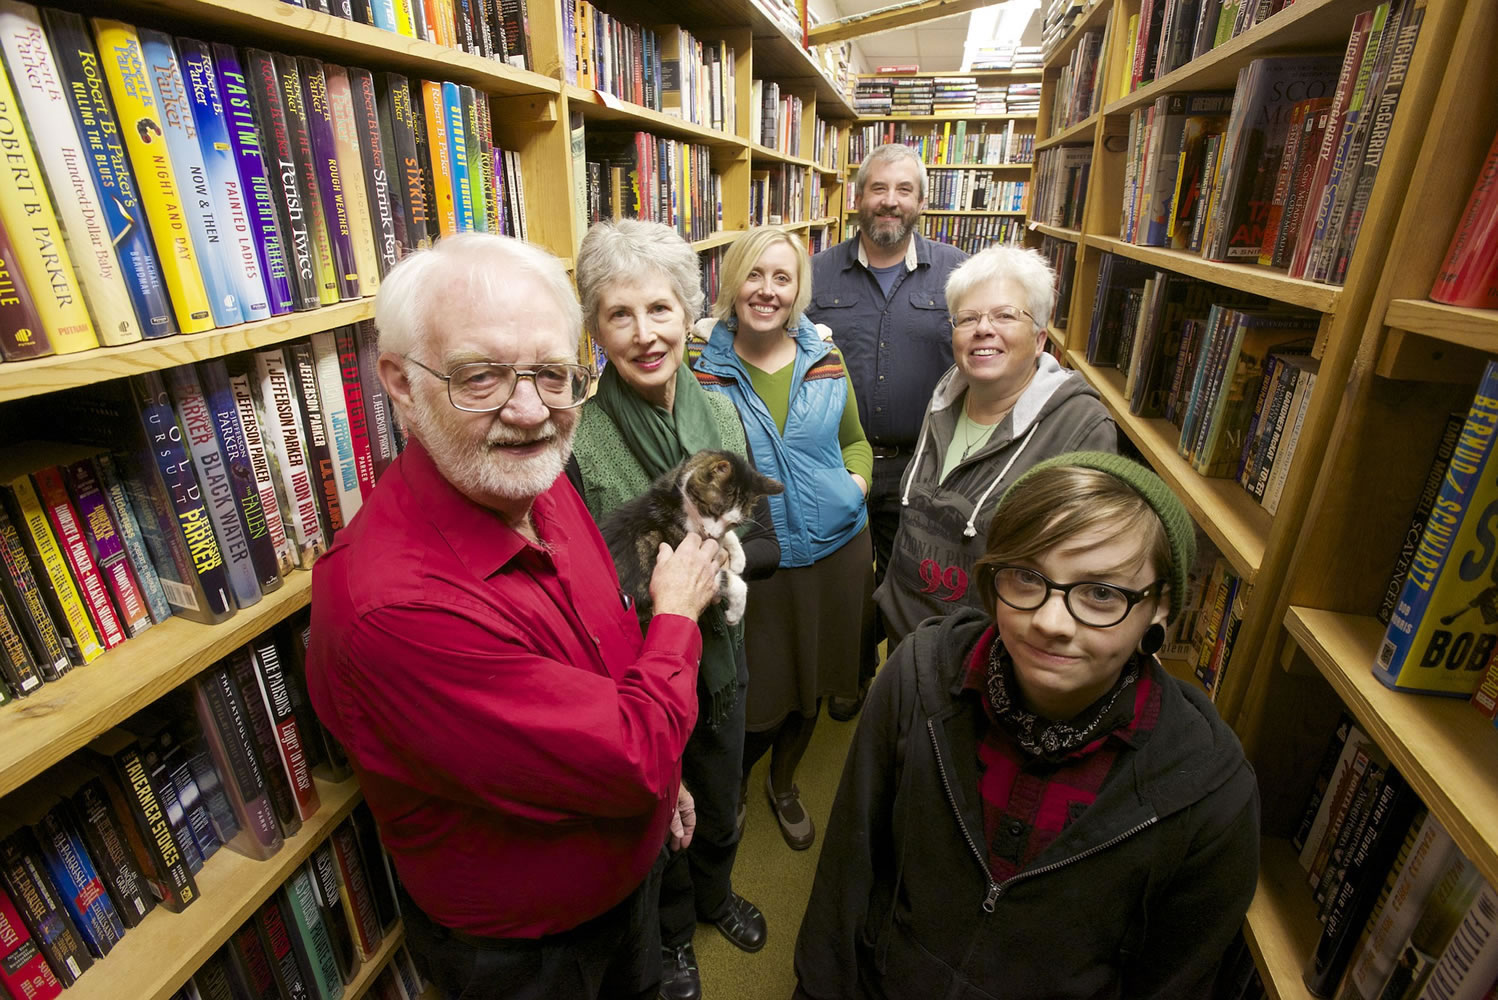 Vintage Books store owners Alec Milner, from left, and Becky Milner -- with Henry the cat -- along with guest author Kate Dyer-Seeley and employees Chris Milner, Pepper Parker and Finch Alder Hogue.